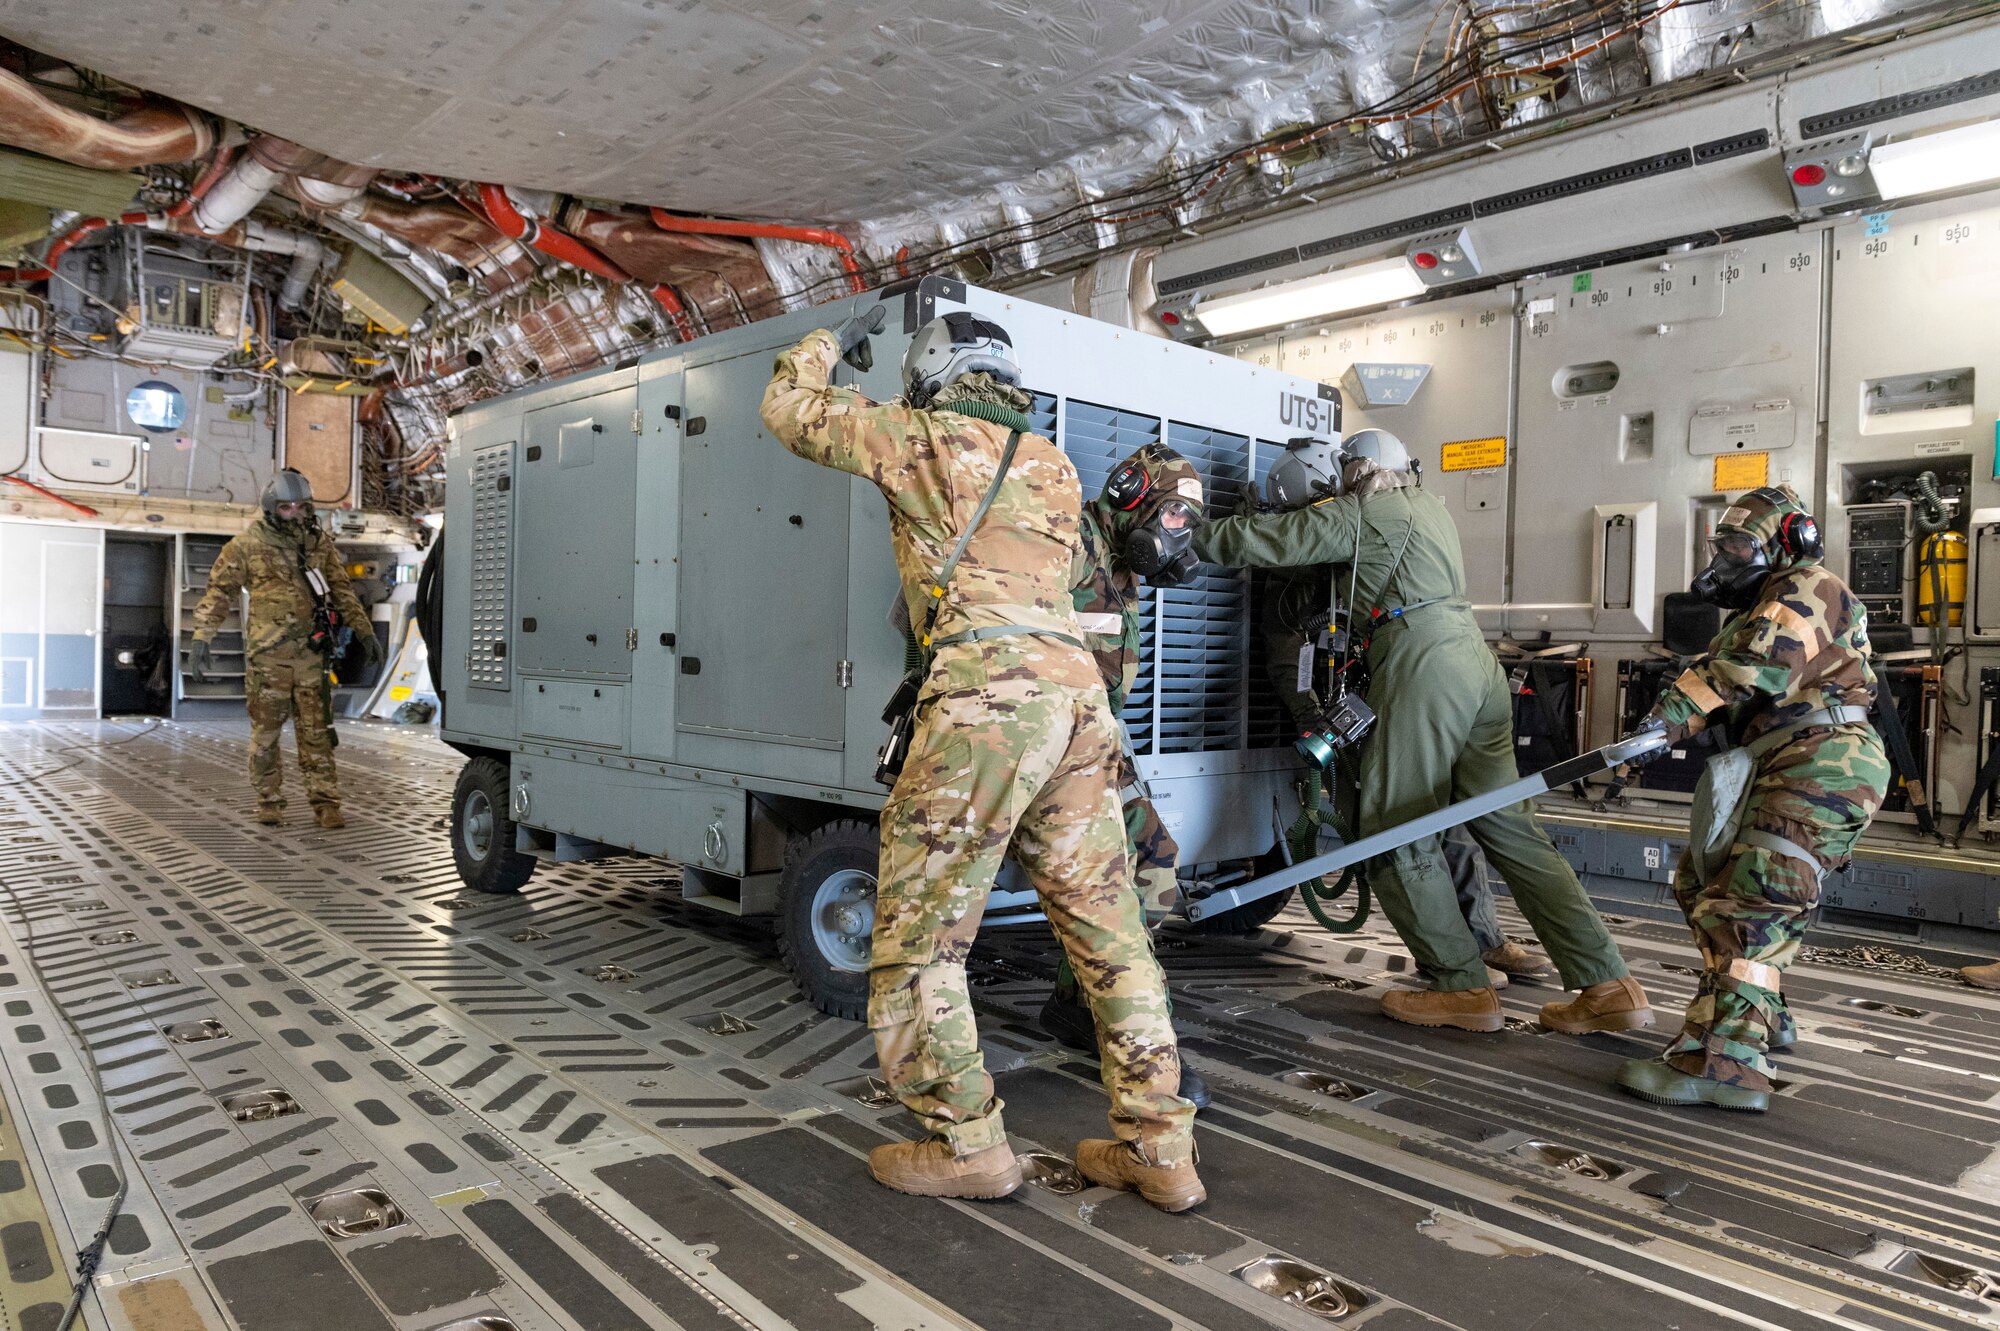 Loadmasters and air transportation specialists with the 167th Airlift Wing, load a hydraulic test stand onto a C-17 Globemaster III aircraft during a simulated chemical environment training at the 167th Airlift Wing, Martinsburg, West Virginia, June 10, 2022. This training included maintainers, loadmasters, pilots and other personnel to simulate the process of preparing, loading and flying the aircraft while in a hazardous chemical environment.